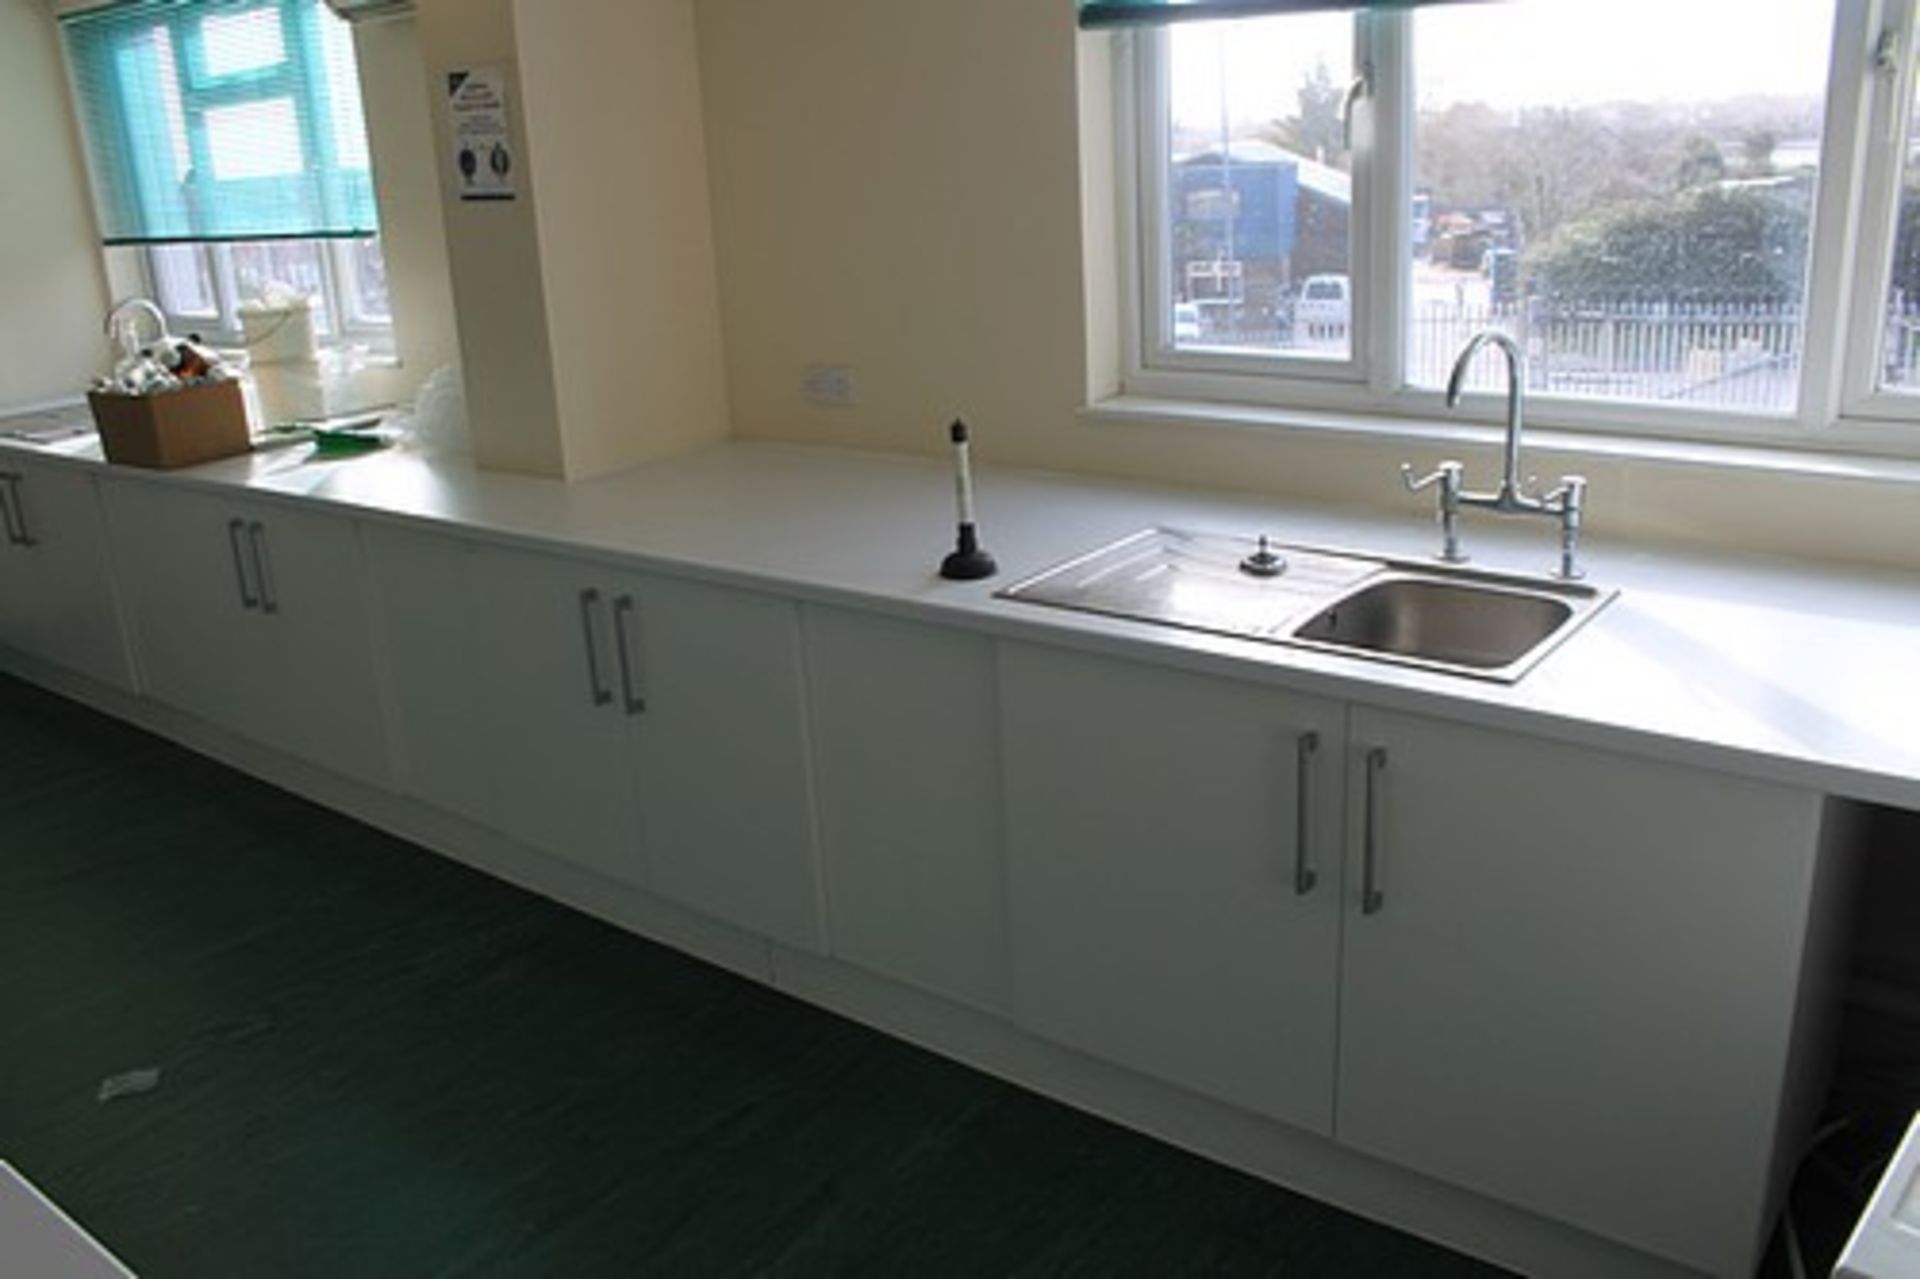 Complete Laboratory cabinets and under bench units white waterproof melamine resin coated faces - Image 5 of 5